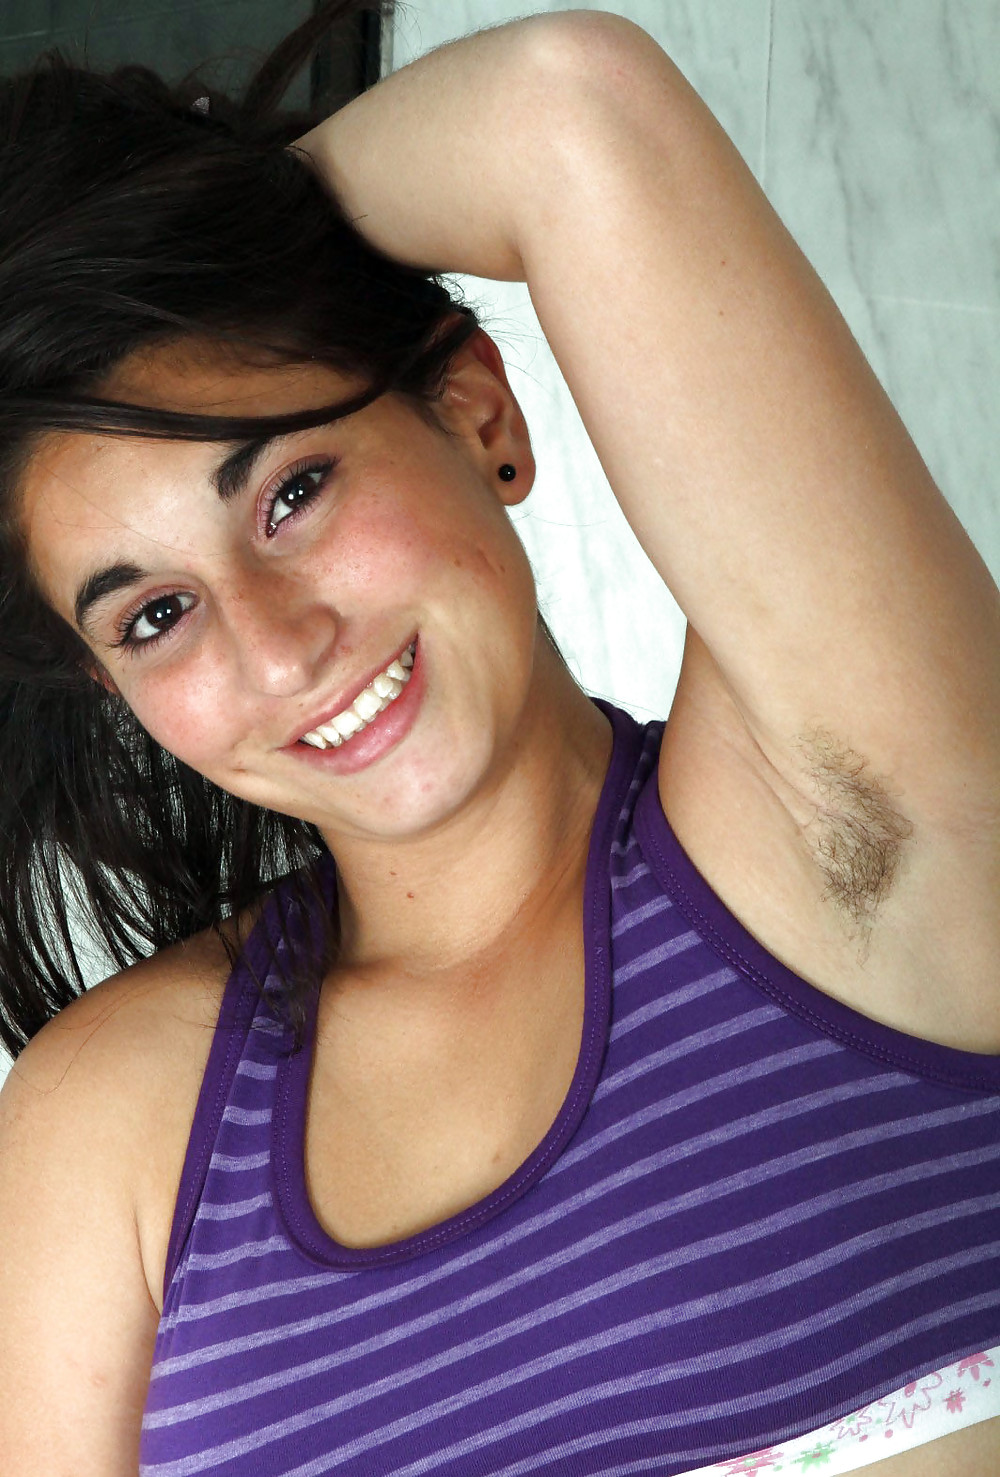 Miscellaneous girls showing hairy, unshaven armpits 3 #36174235